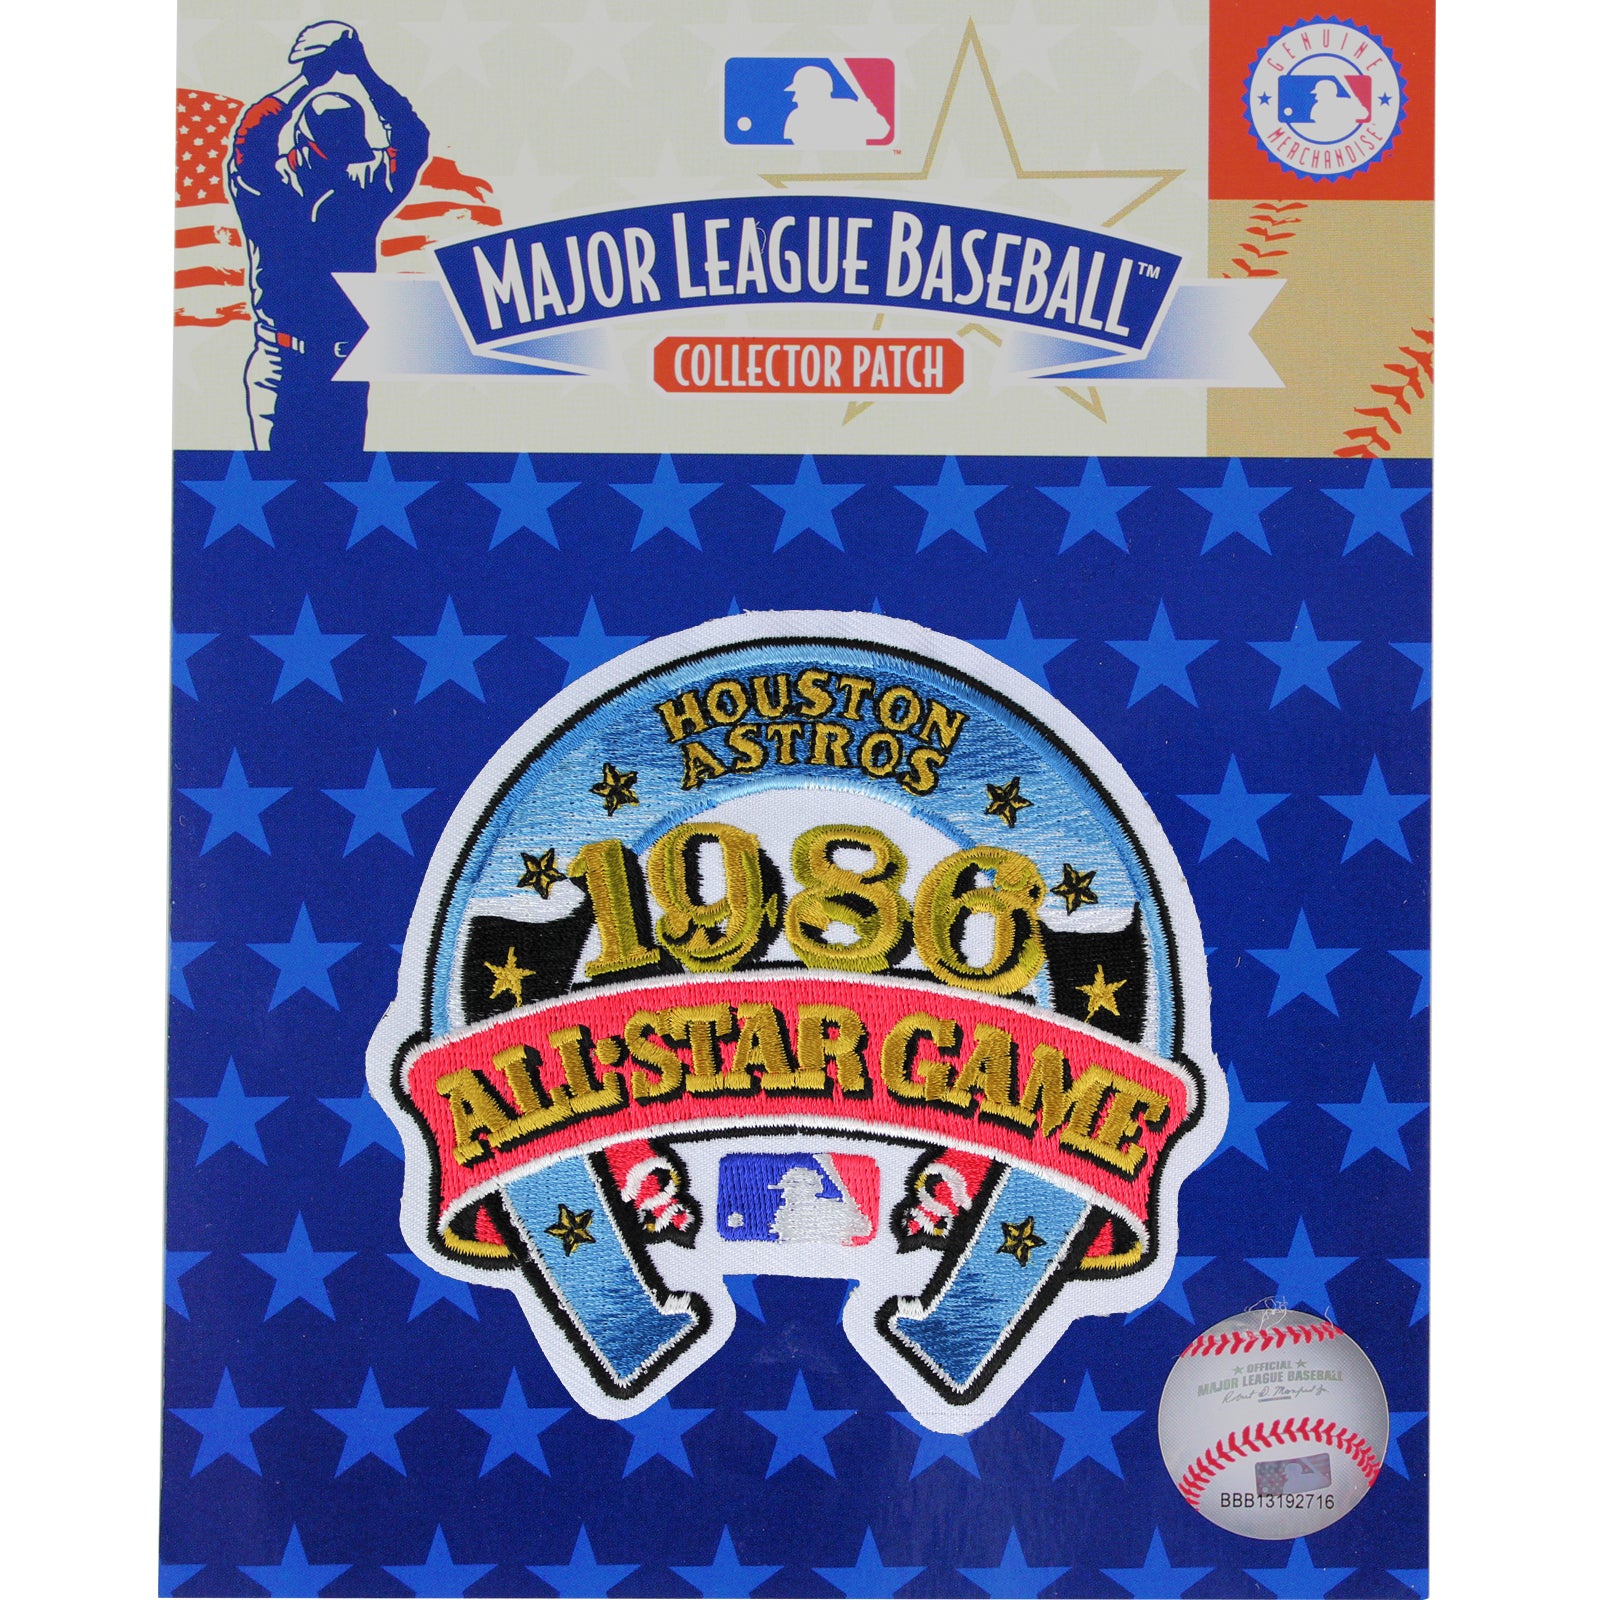 1986 MLB World Series Patch (Mets vs. Red Sox)